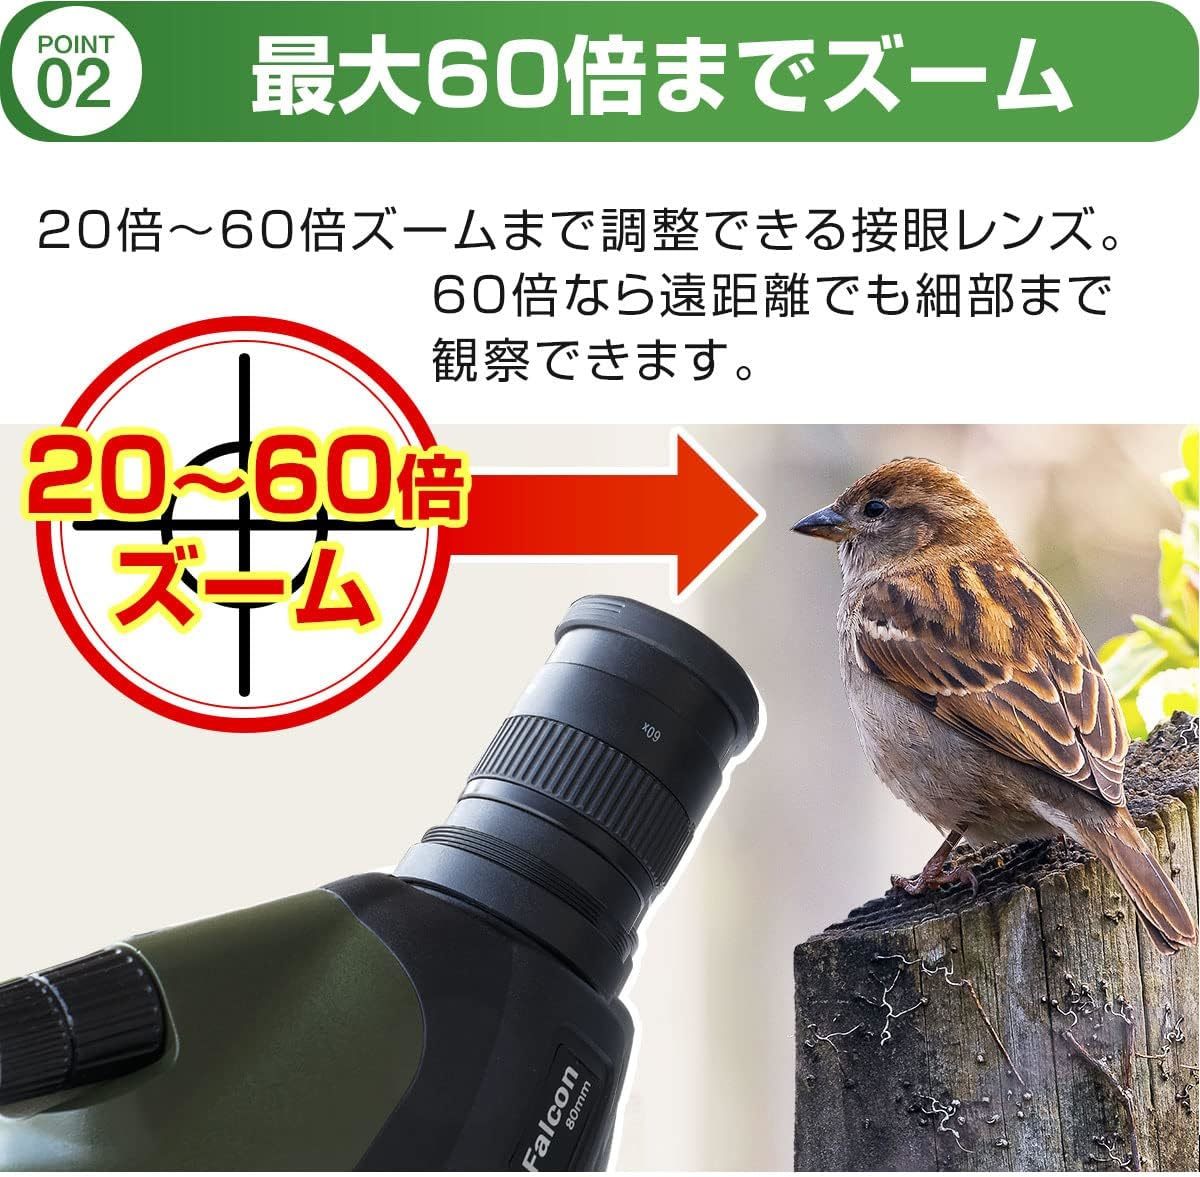  maximum 900m 80mm diameter against thing lens telescope 20~60 times zoom height magnification 20-60X80 field scope scope smartphone photographing video recording waterproof tripod bird bird 